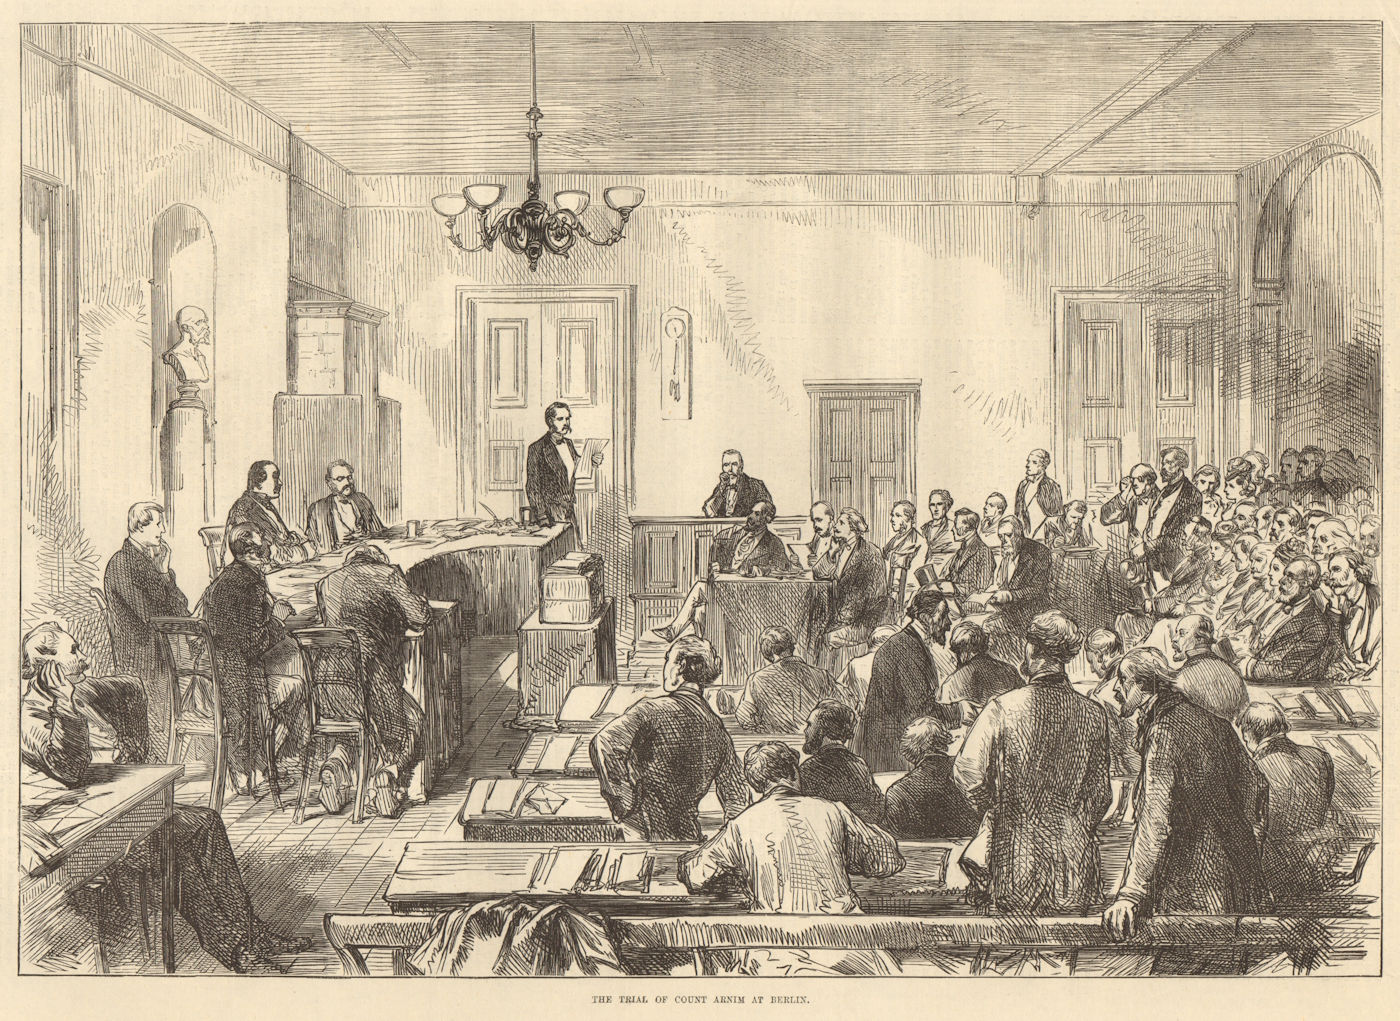 Associate Product The trial of Count Arnim at Berlin. Law 1874 antique ILN full page print